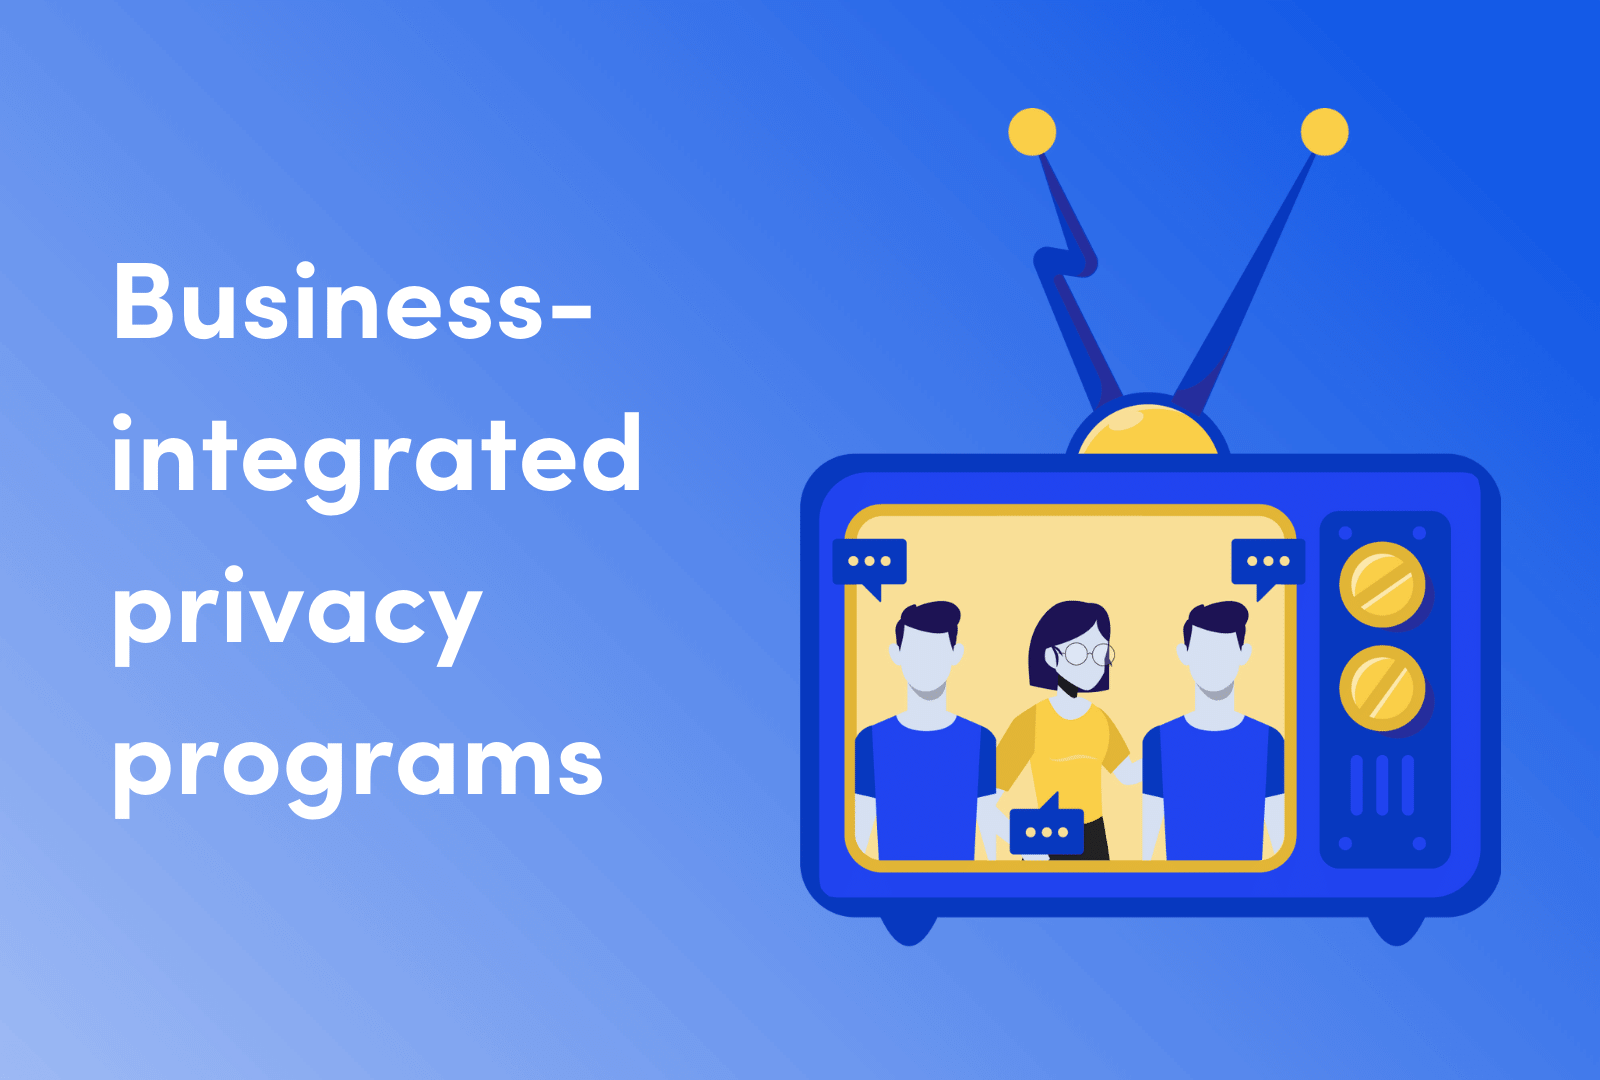 Building business-integrated privacy programs